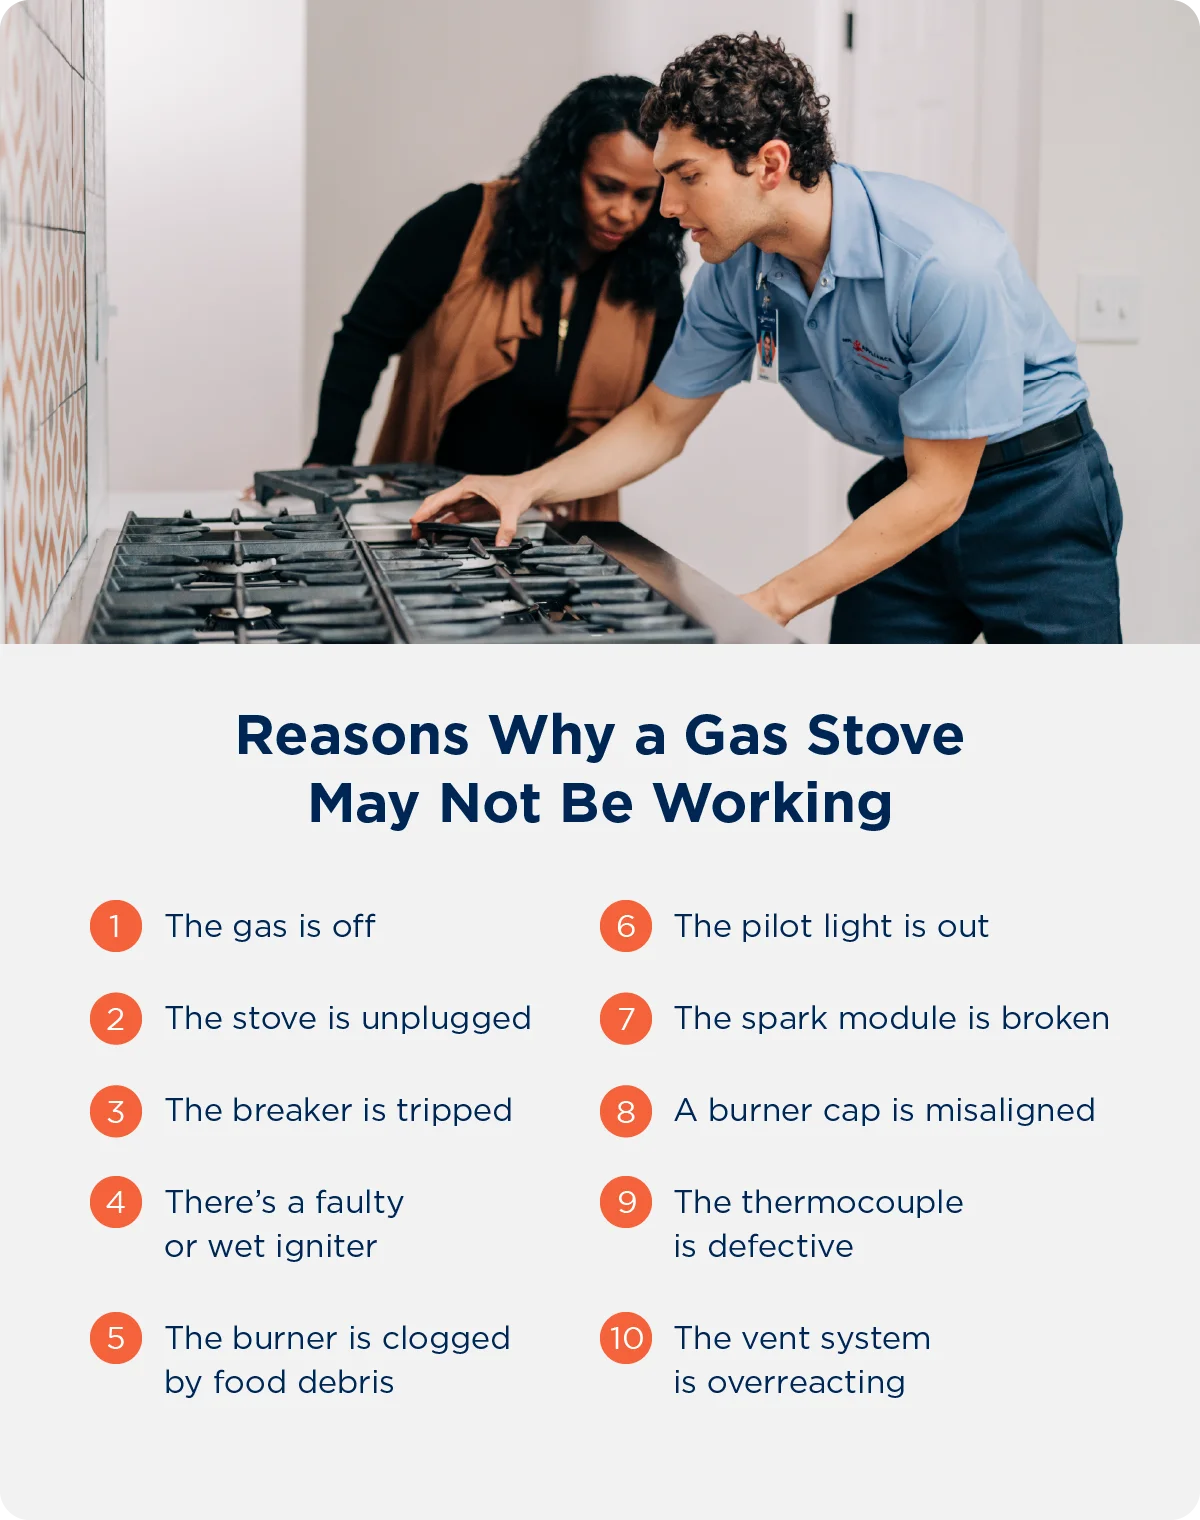 Ten common reasons why a gas stove may not be working